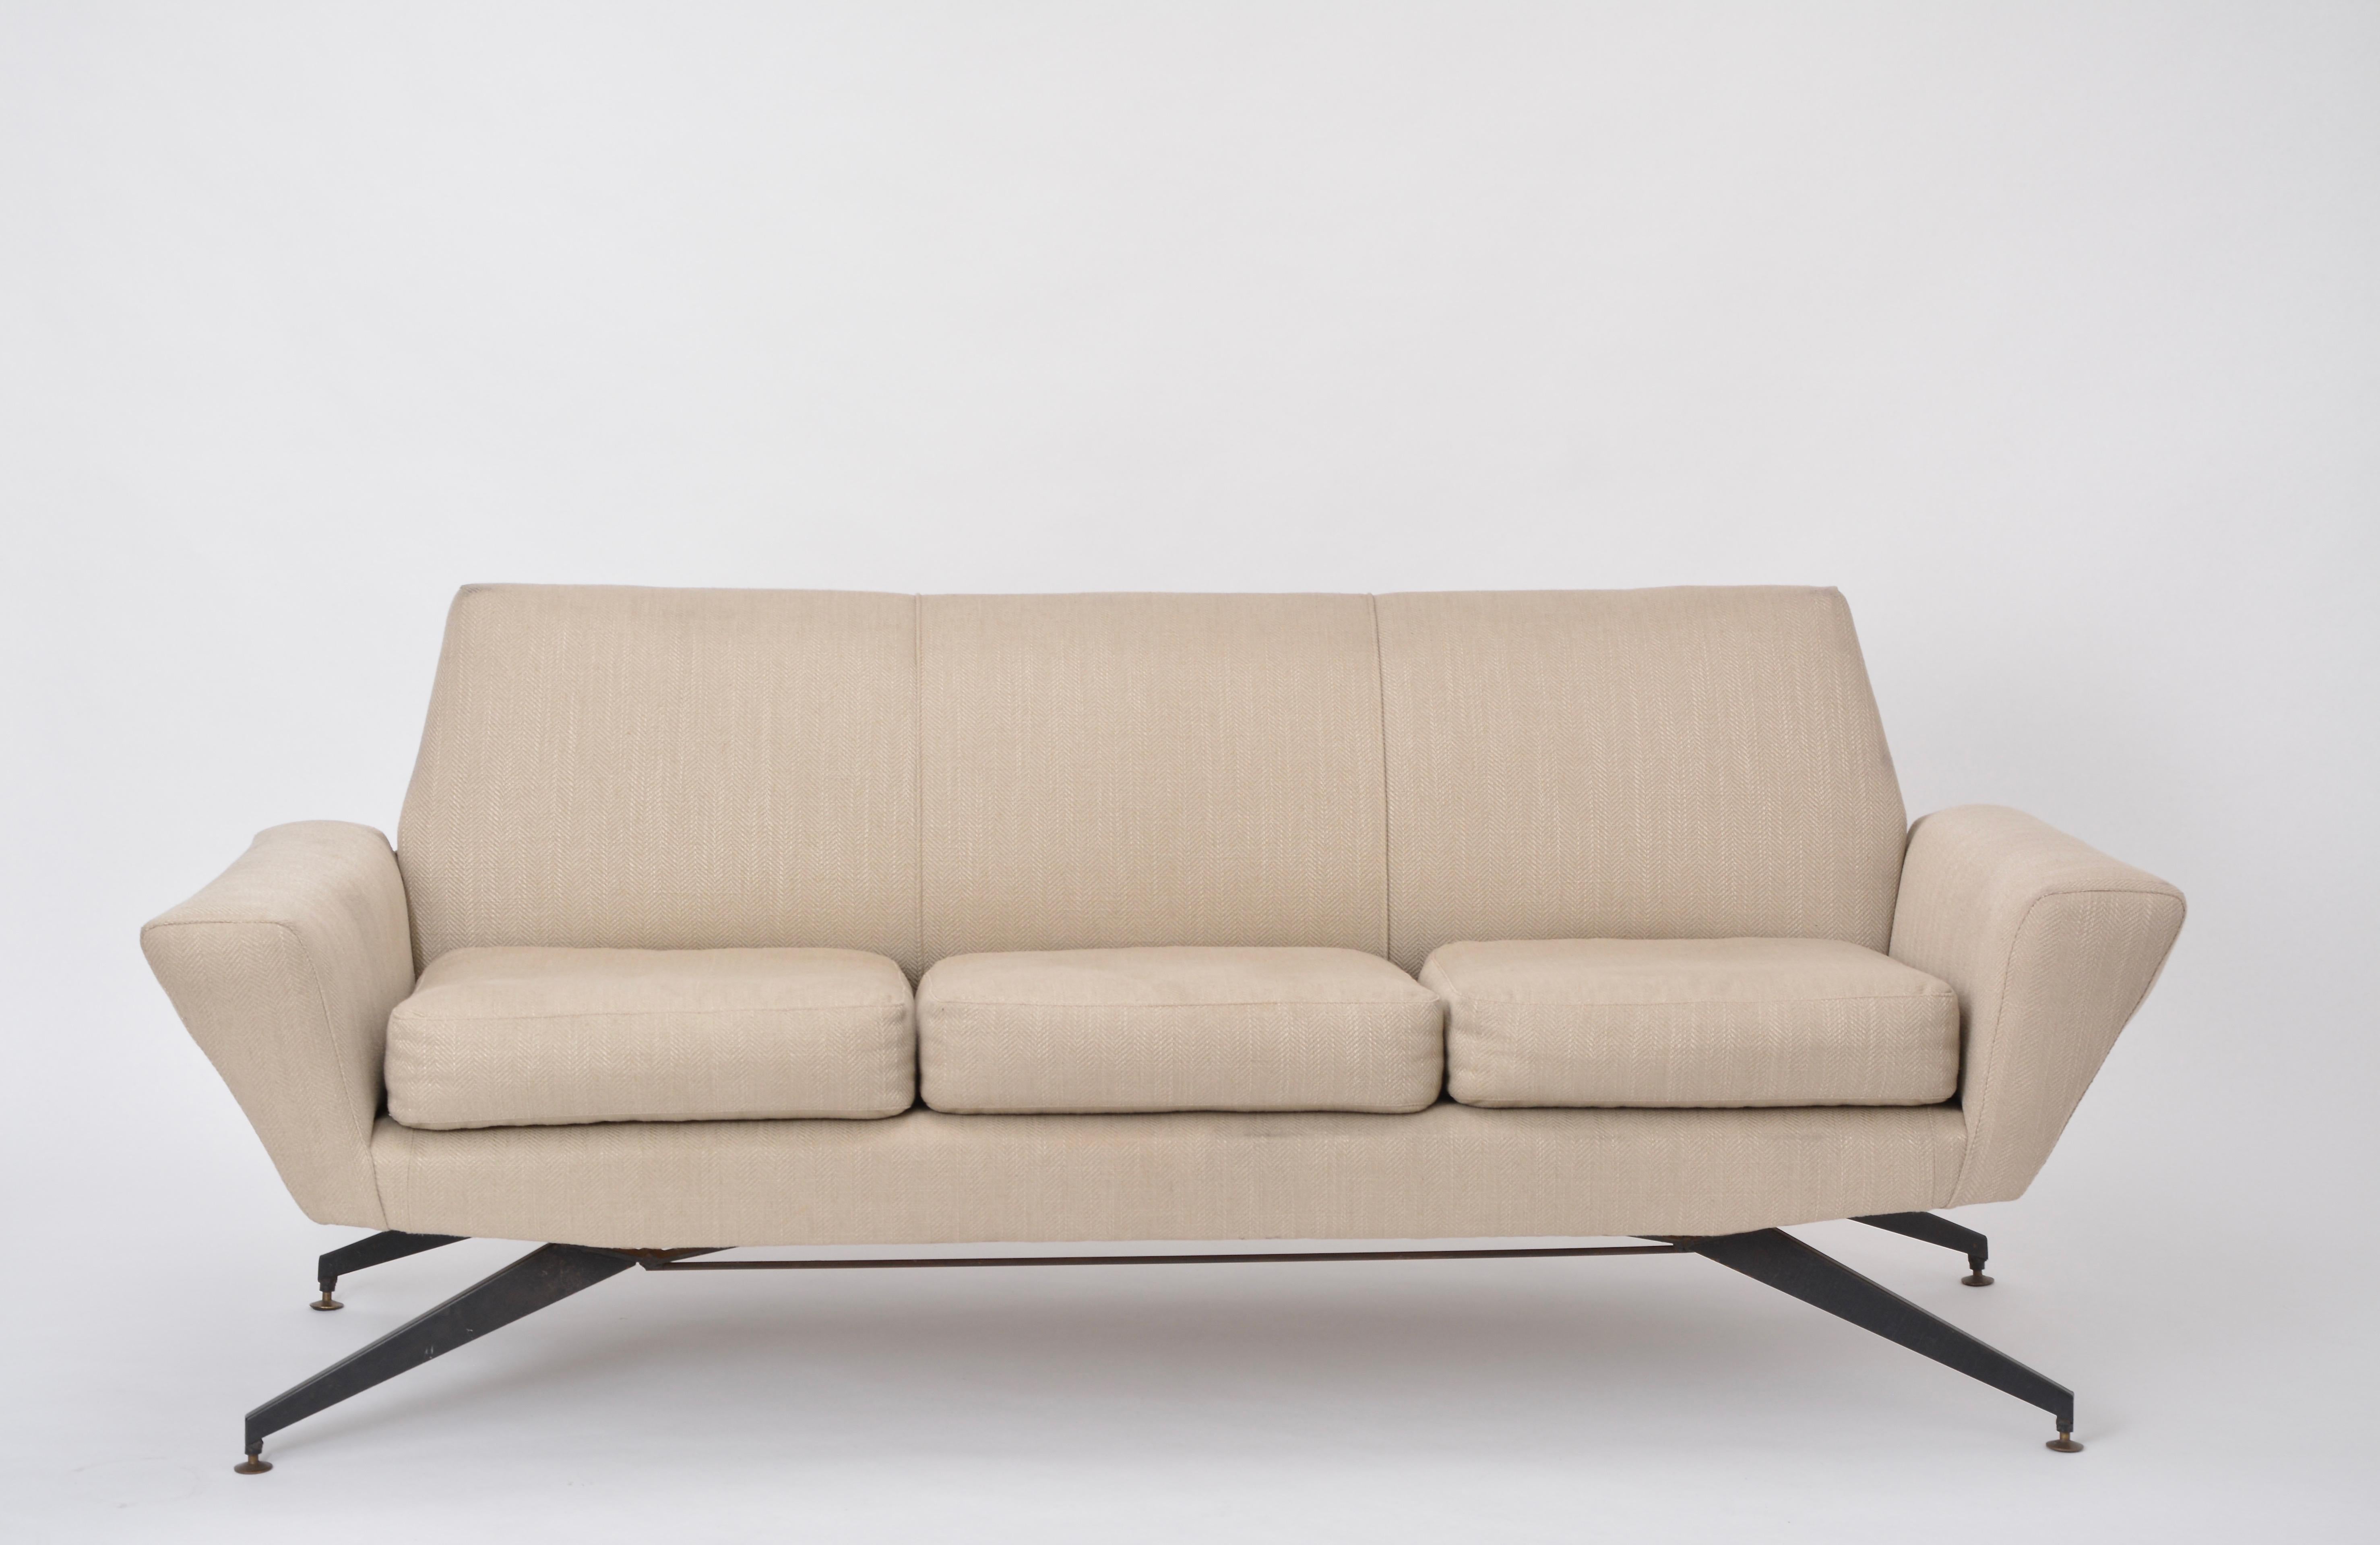 Italian Mid-Century Modern sofa with black Metal base by Lenzi

This three-seat sofa was produced by Italian company Lenzi in the 1950s. The base is made of lacquered metal.
The upholstery is in good condition, the fabric with signs of use and some